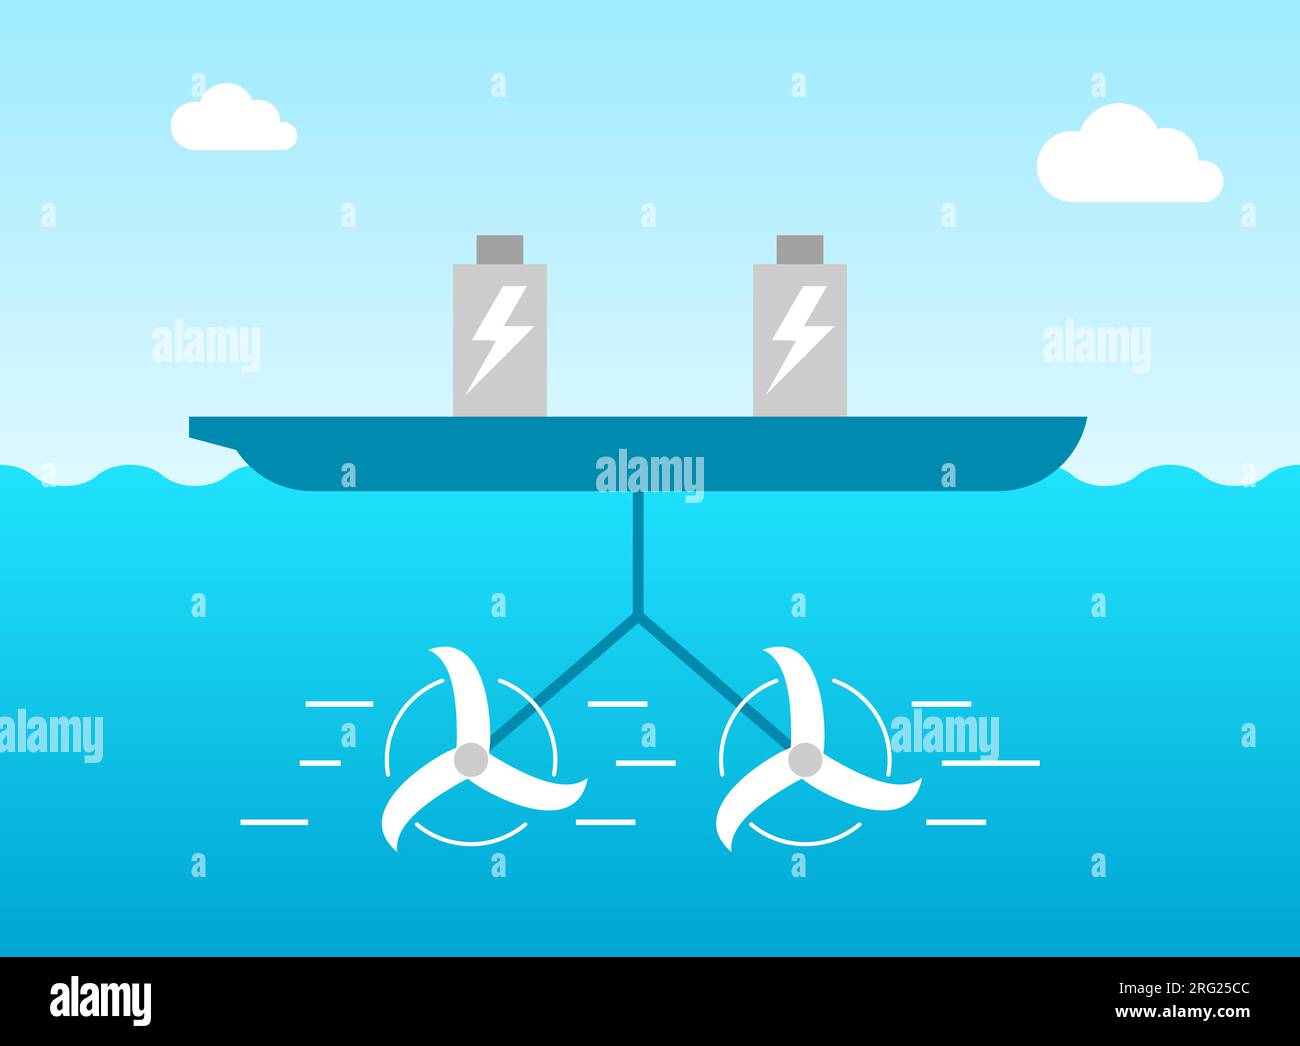 Tidal energy concept. Renewable power sources. Zero emission. Carbon neutral. Alternative energy. Natural rise and fall of ocean tides and currents. Stock Vector